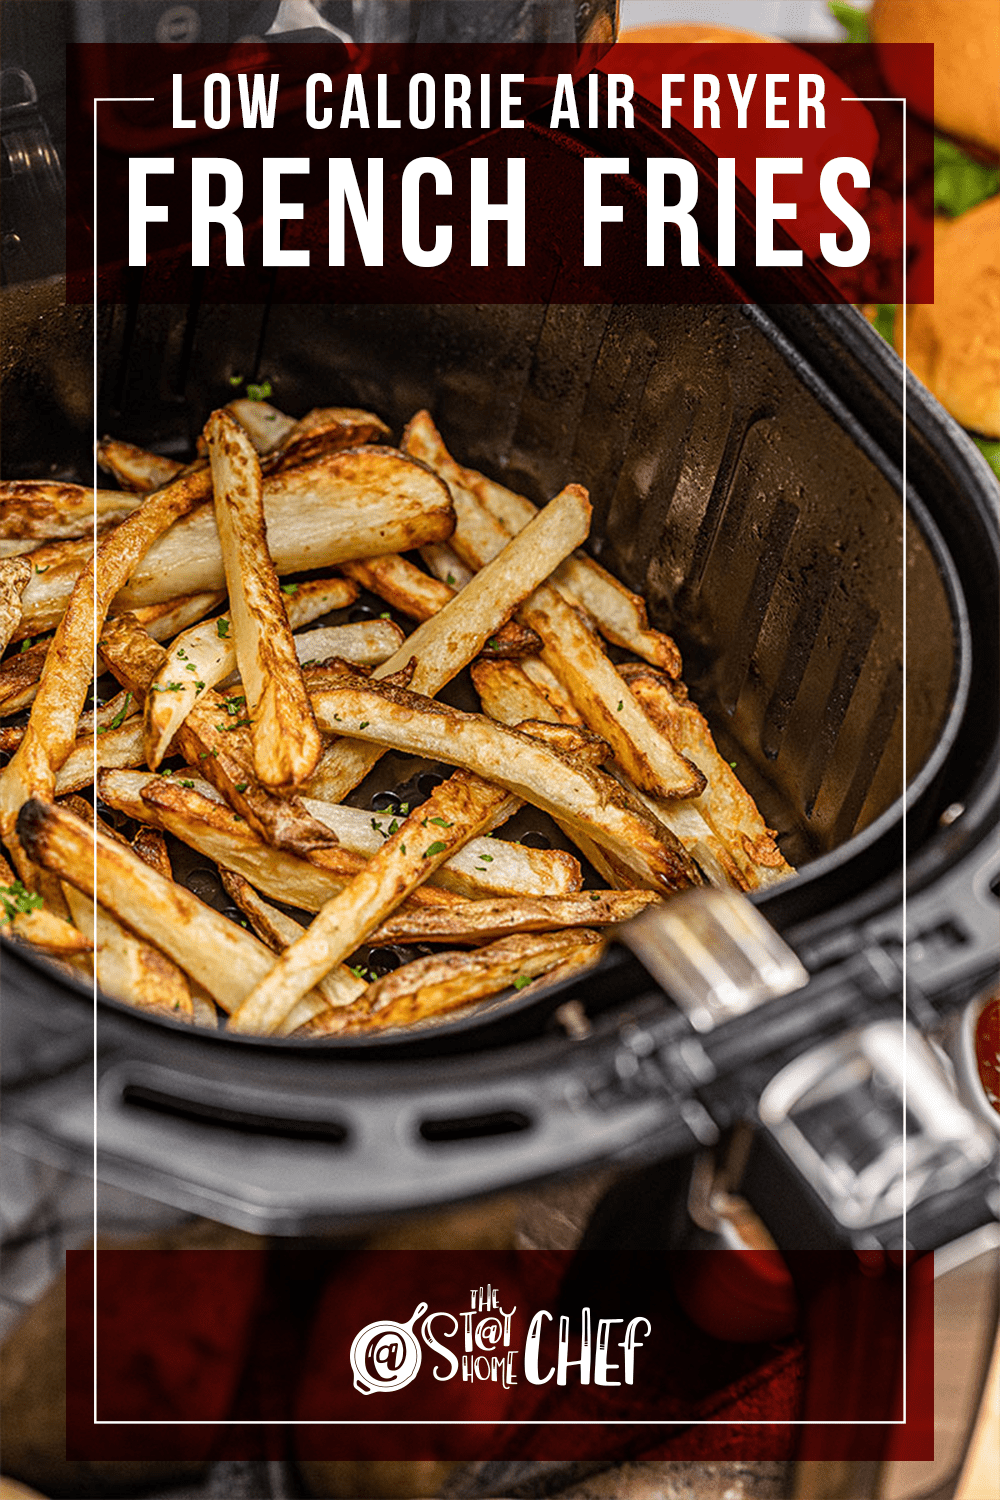 Low Calorie Air Fryer French Fries